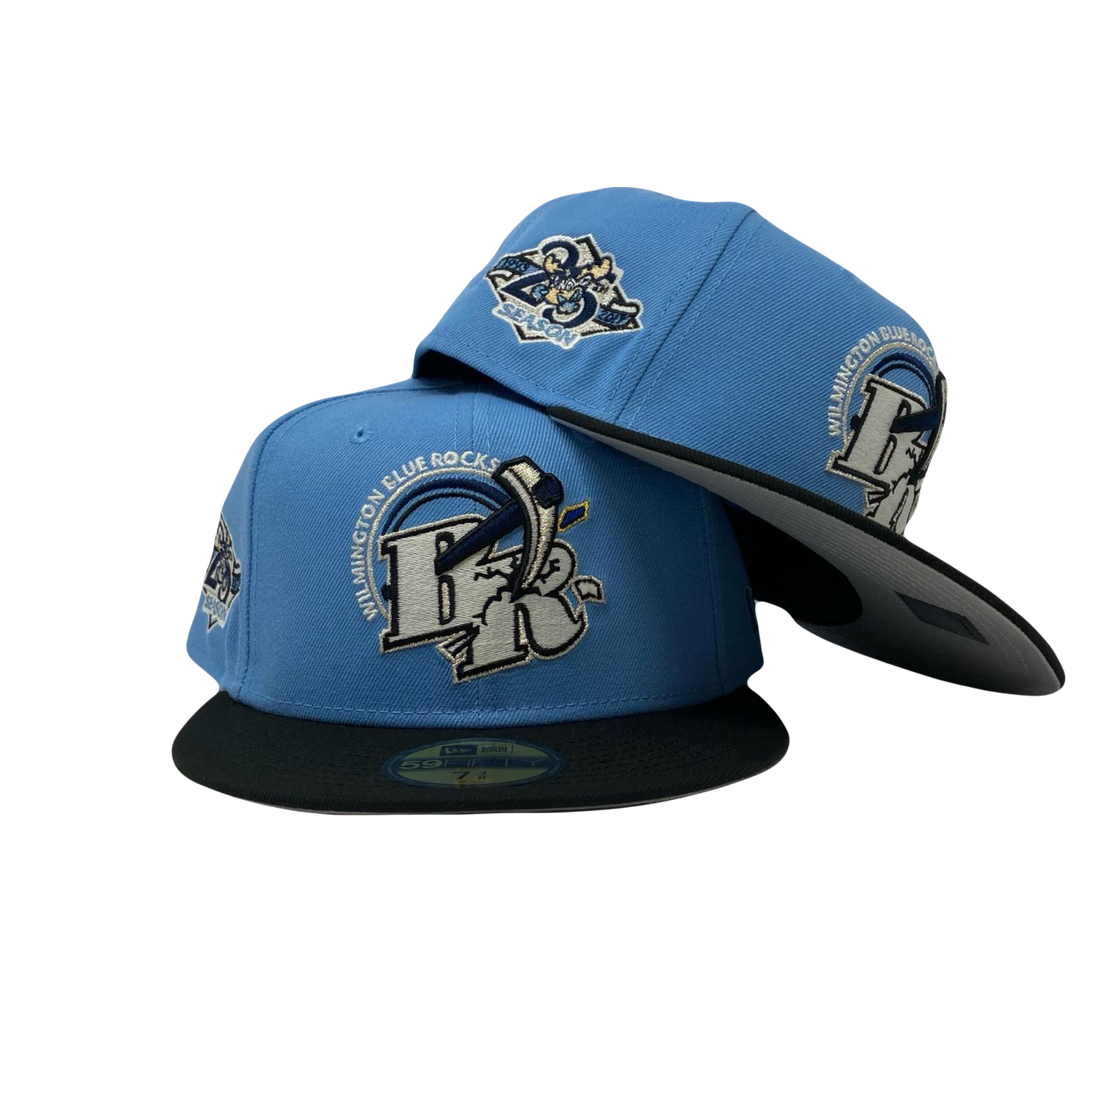 Wilmington Blue Rocks 25th Anniversary Minor League New Era Fitted Hat